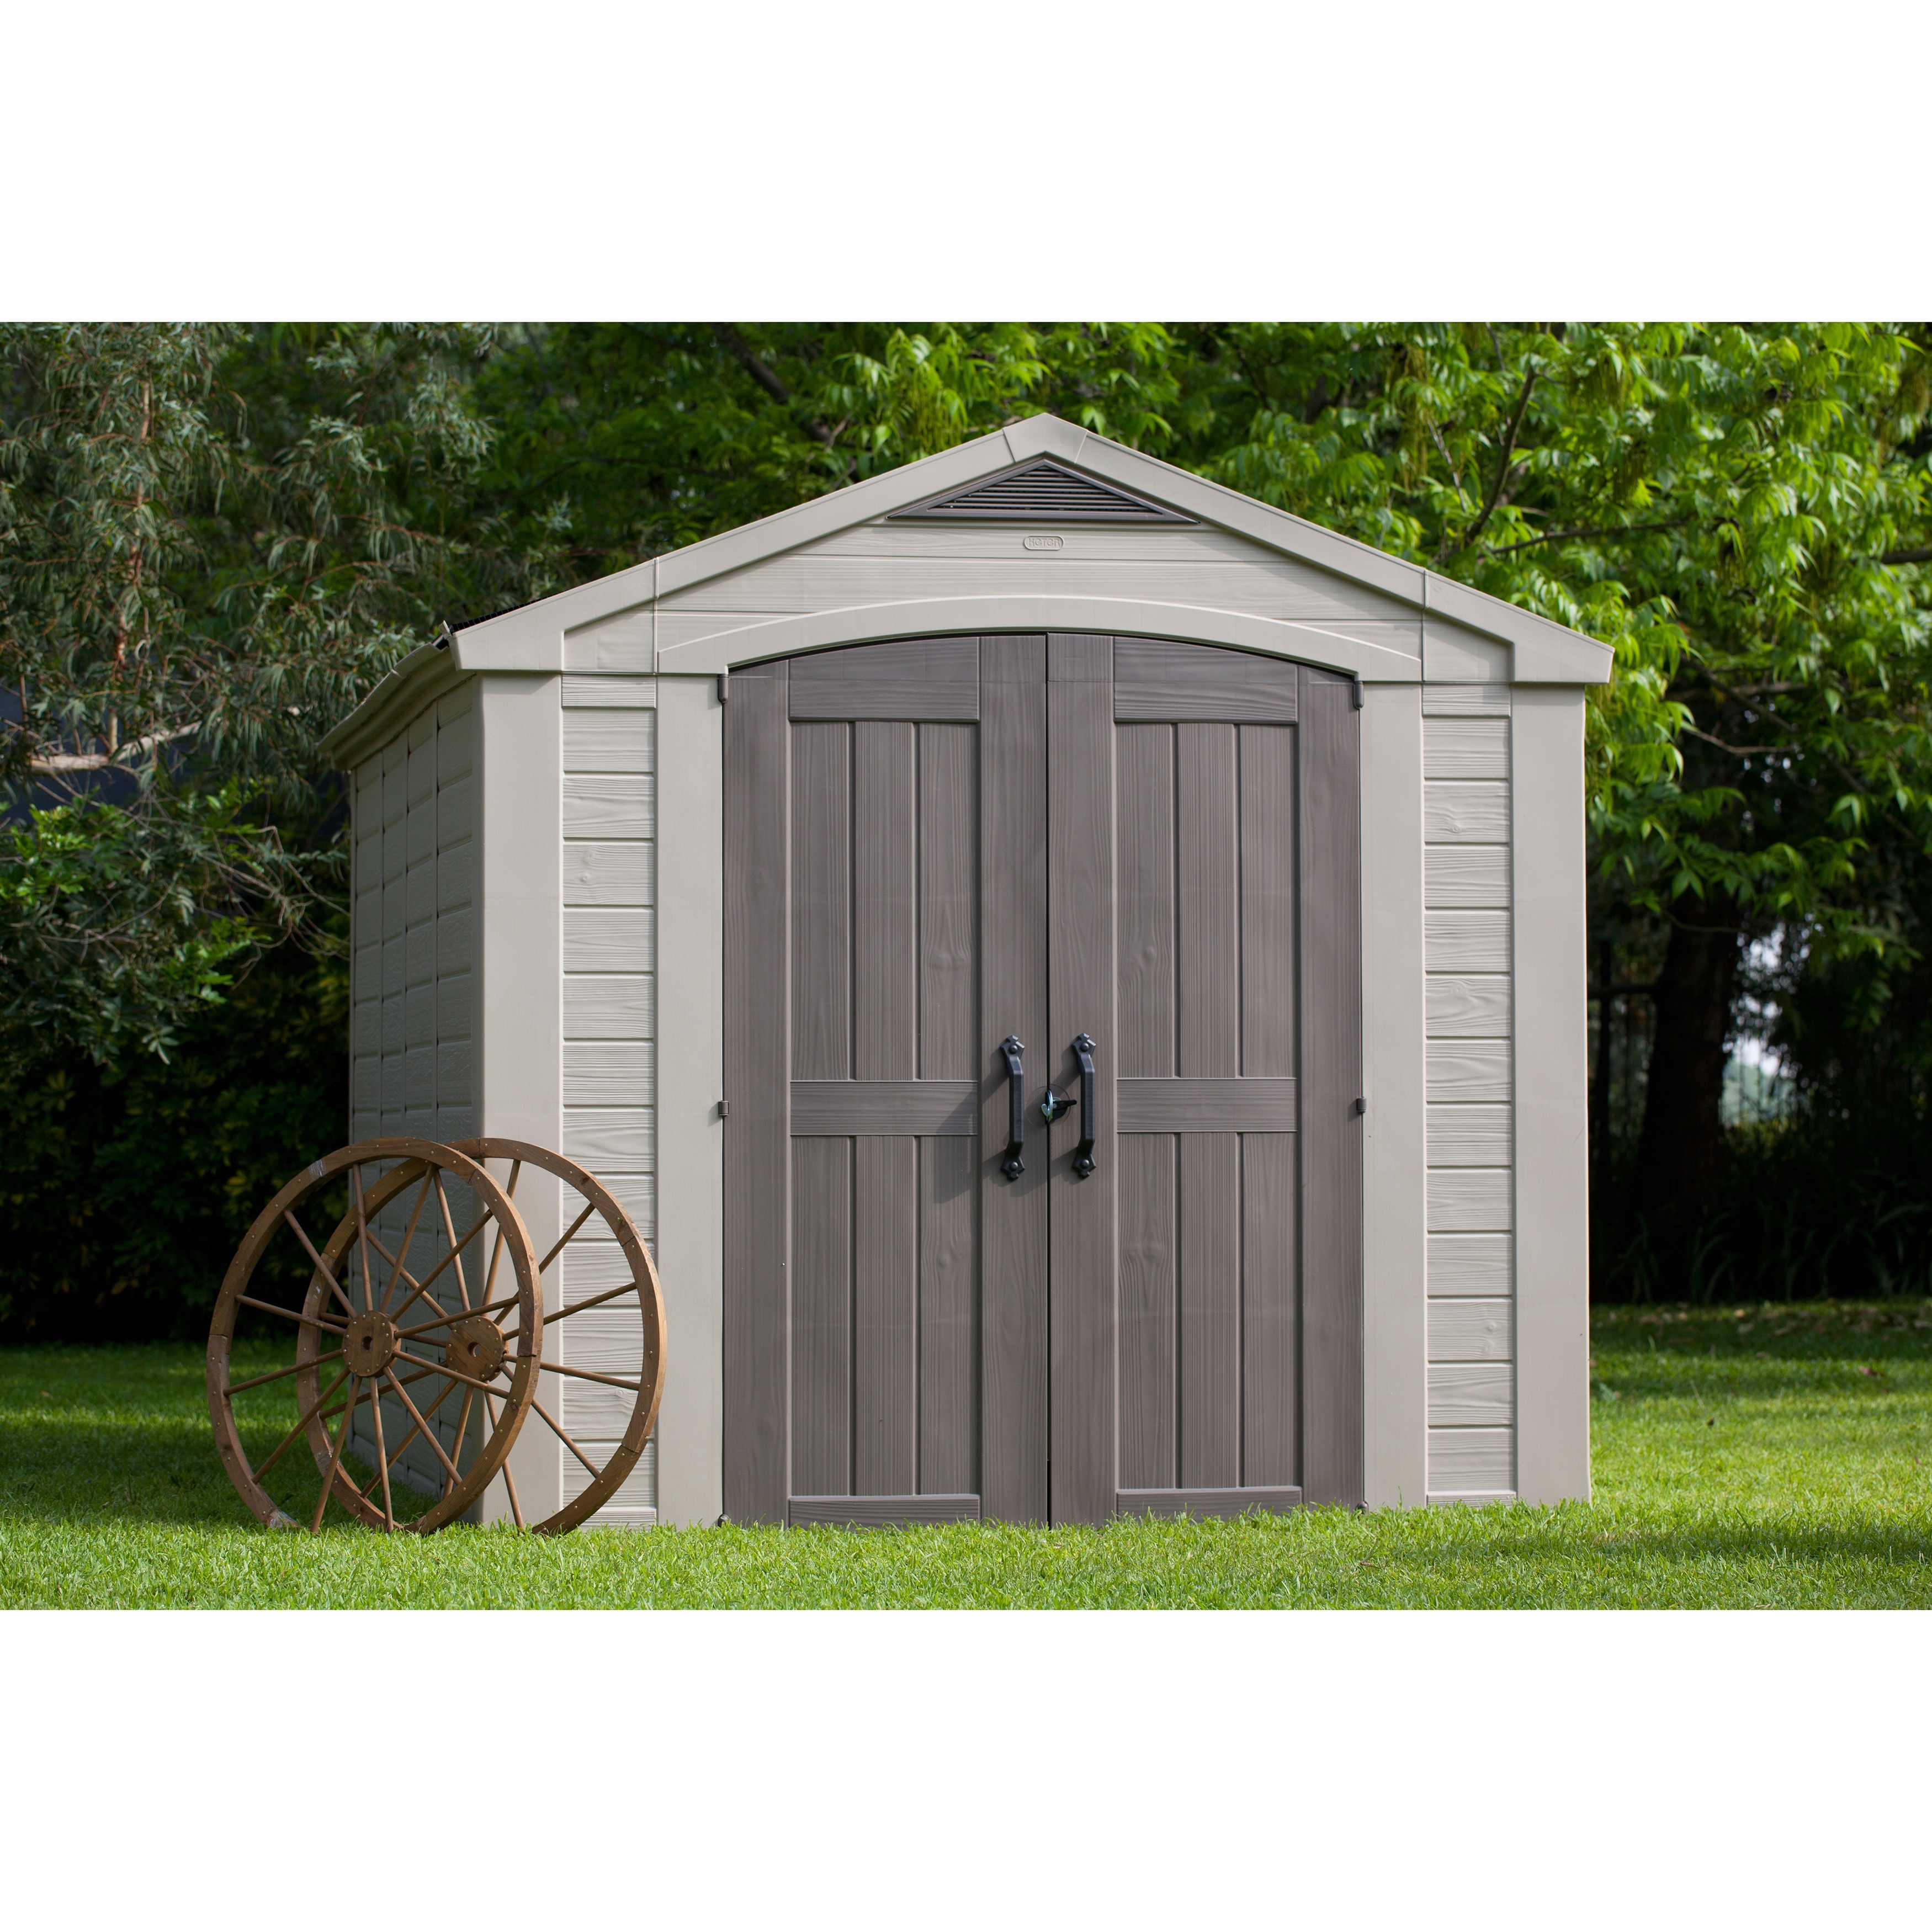 Keter Manor 4x6 Resin Outdoor Storage Shed Kit-Perfect to Store Patio  Furniture, Garden Tools Bike Accessories, Beach Chairs and Lawn Mower, Grey  